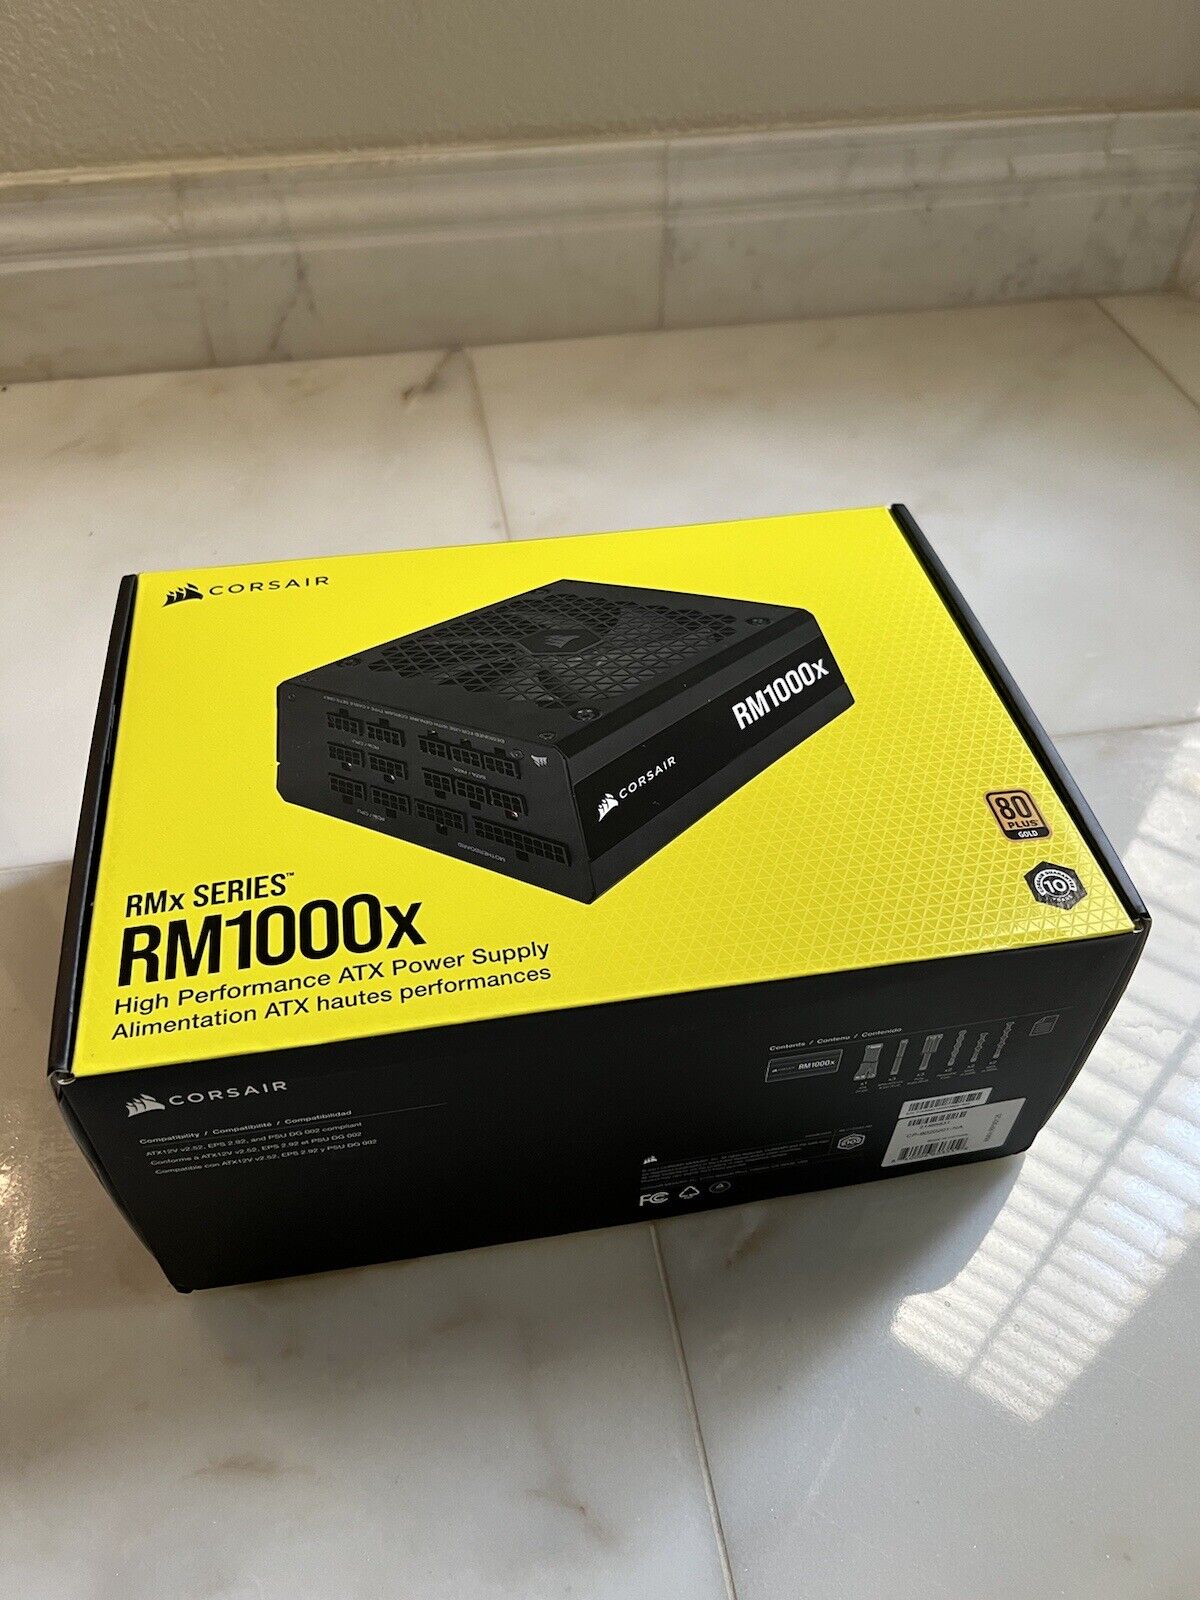 Corsair RM1000x High Performance ATX Power Supply Excellent Condition Open Box